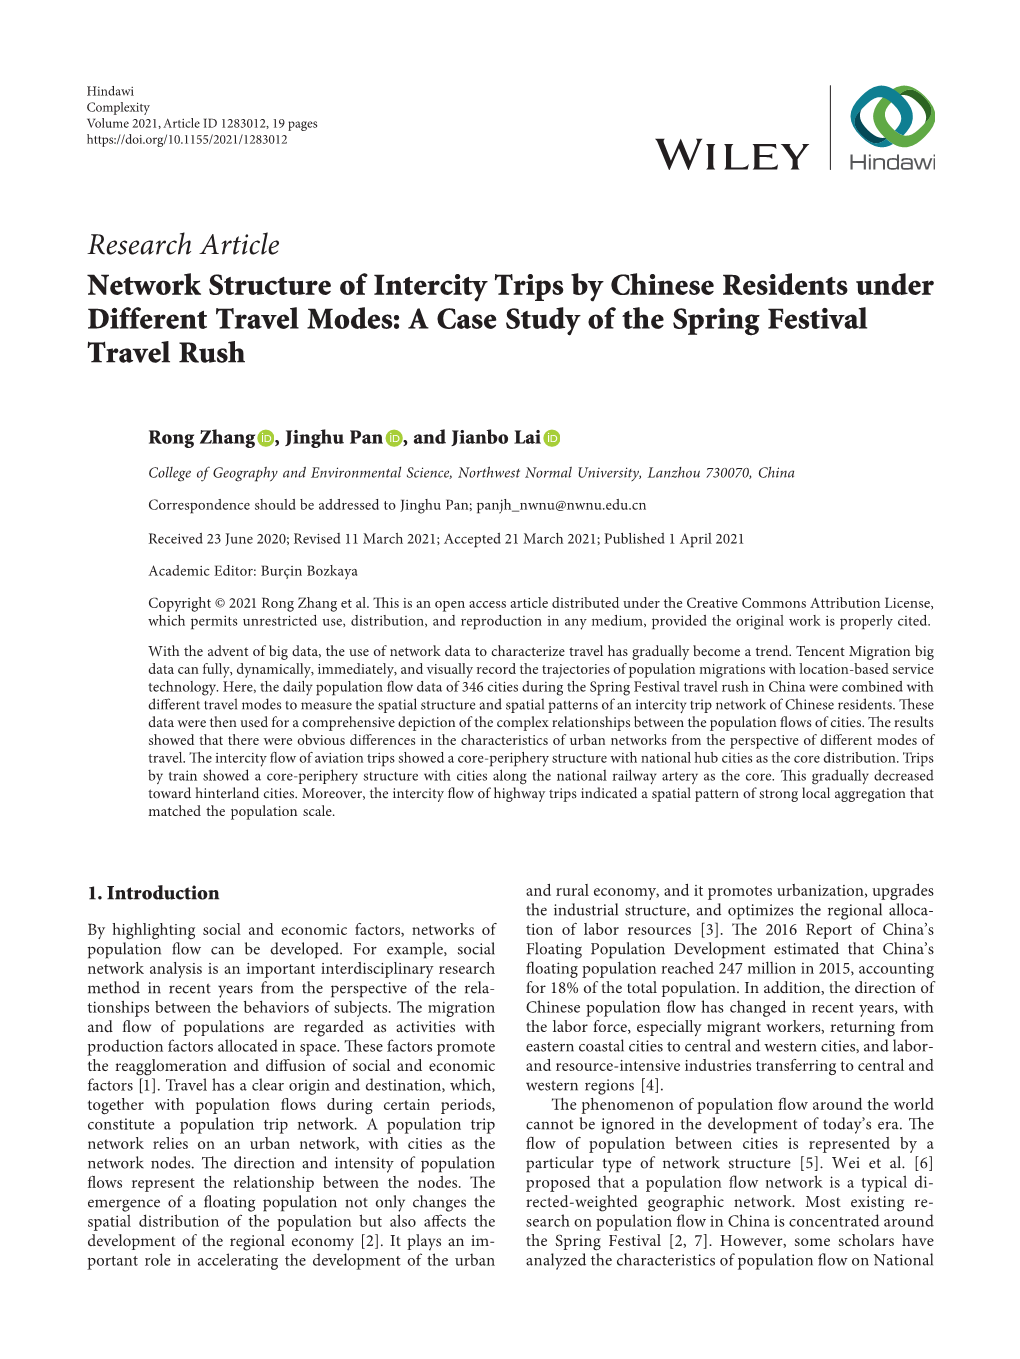 Research Article Network Structure of Intercity Trips by Chinese Residents Under Different Travel Modes: a Case Study of the Spring Festival Travel Rush